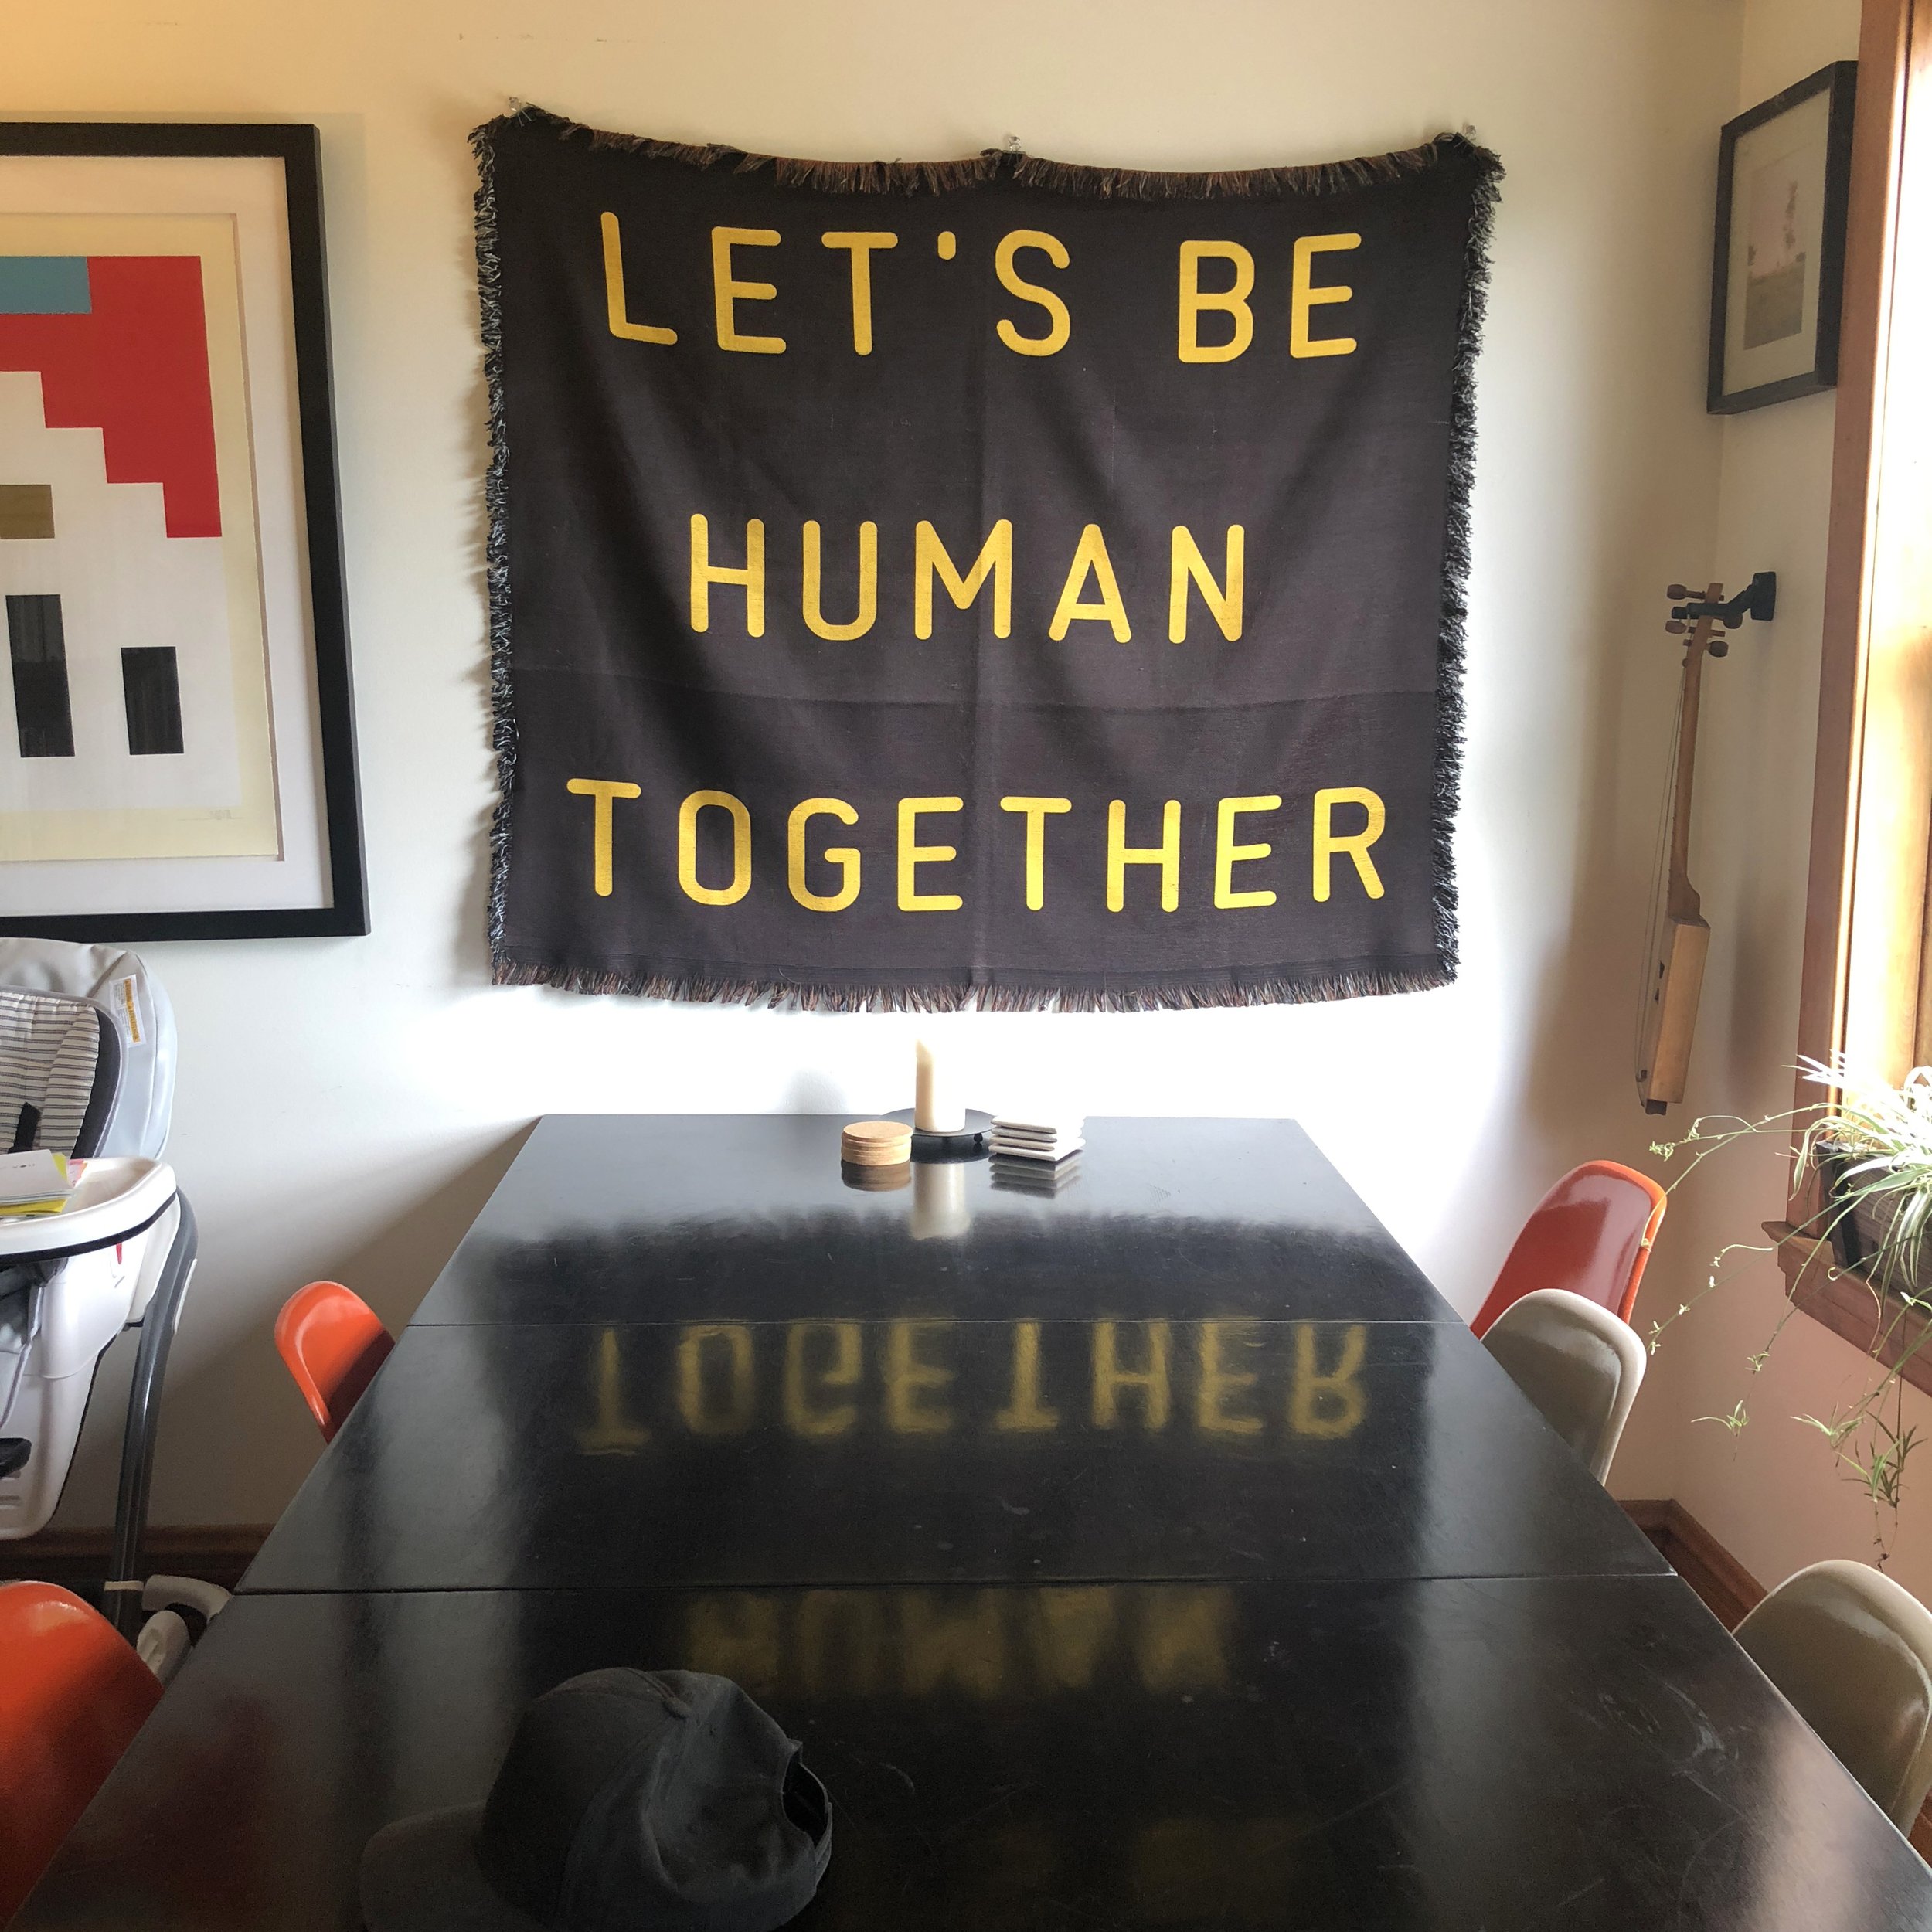 matthew hoffman private collection lets be human together.JPG